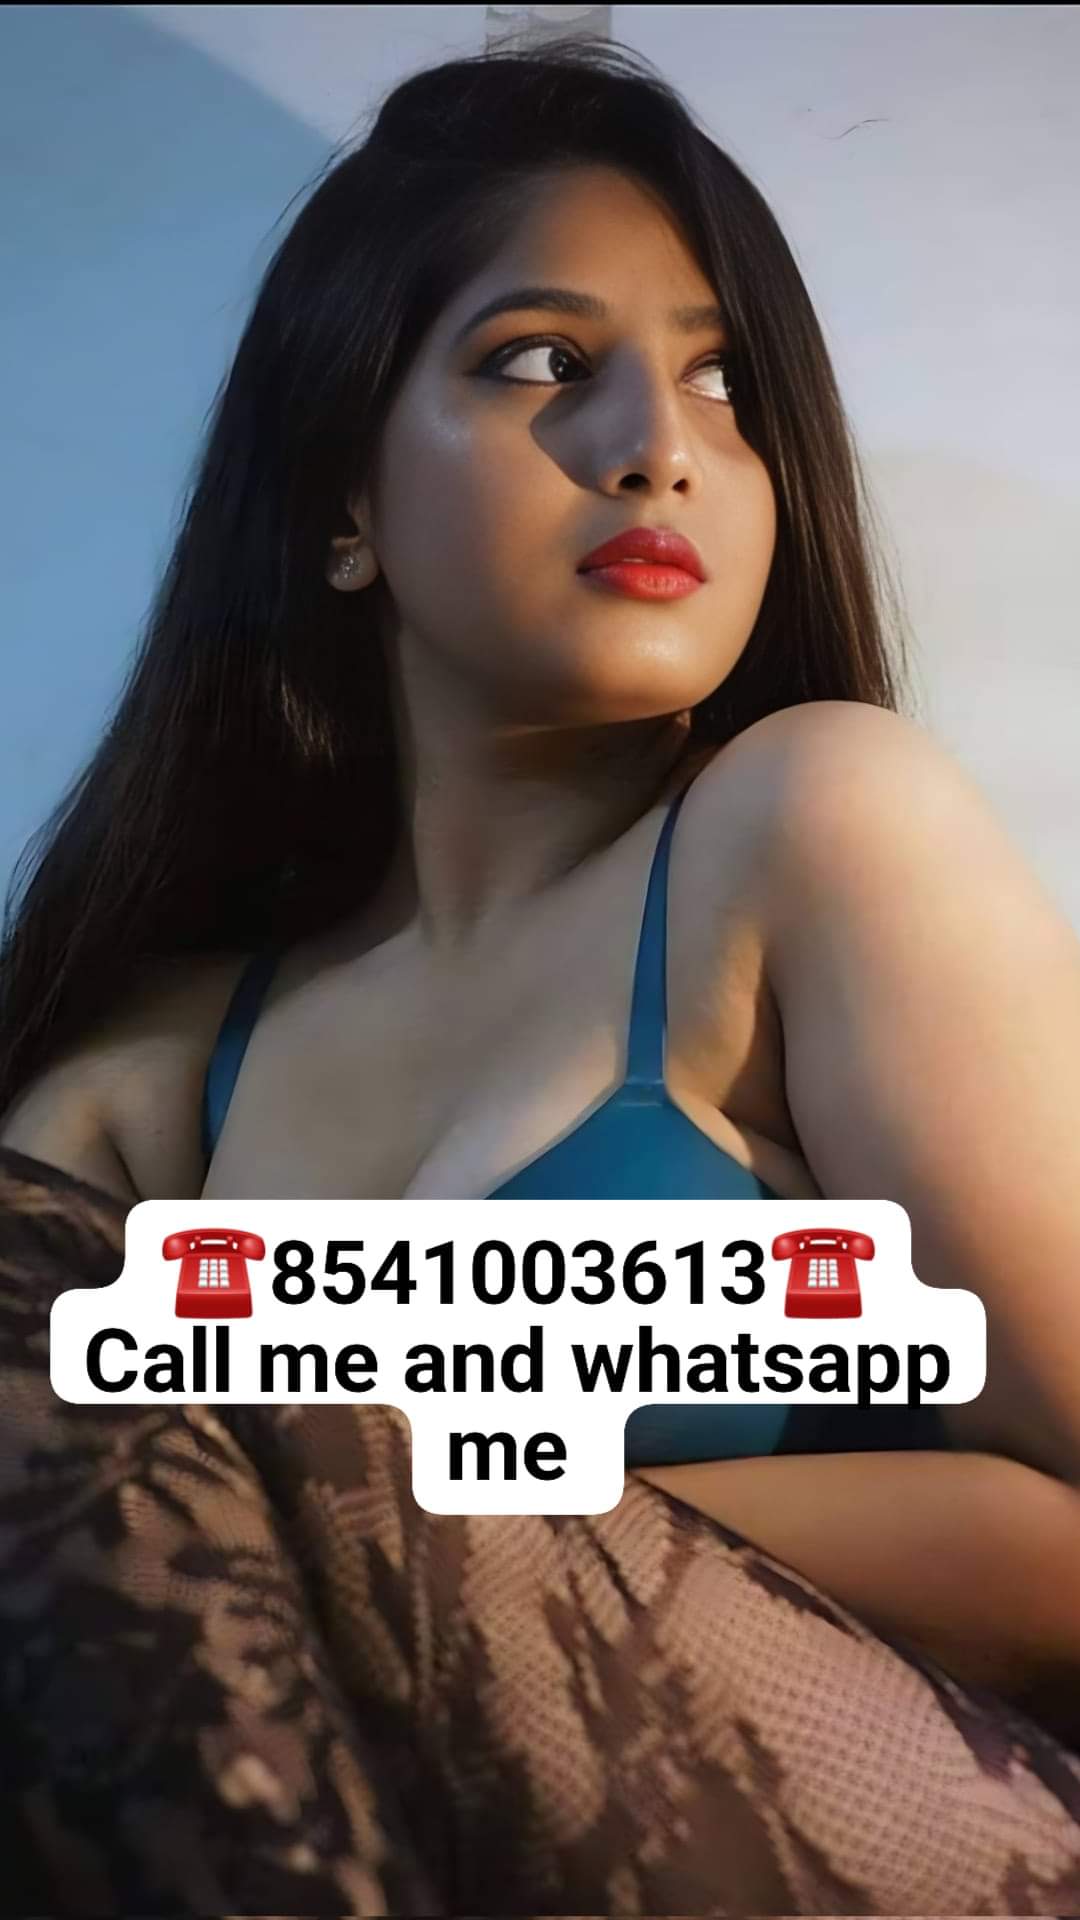 Bavdhan call girls available hot and sexy college girls